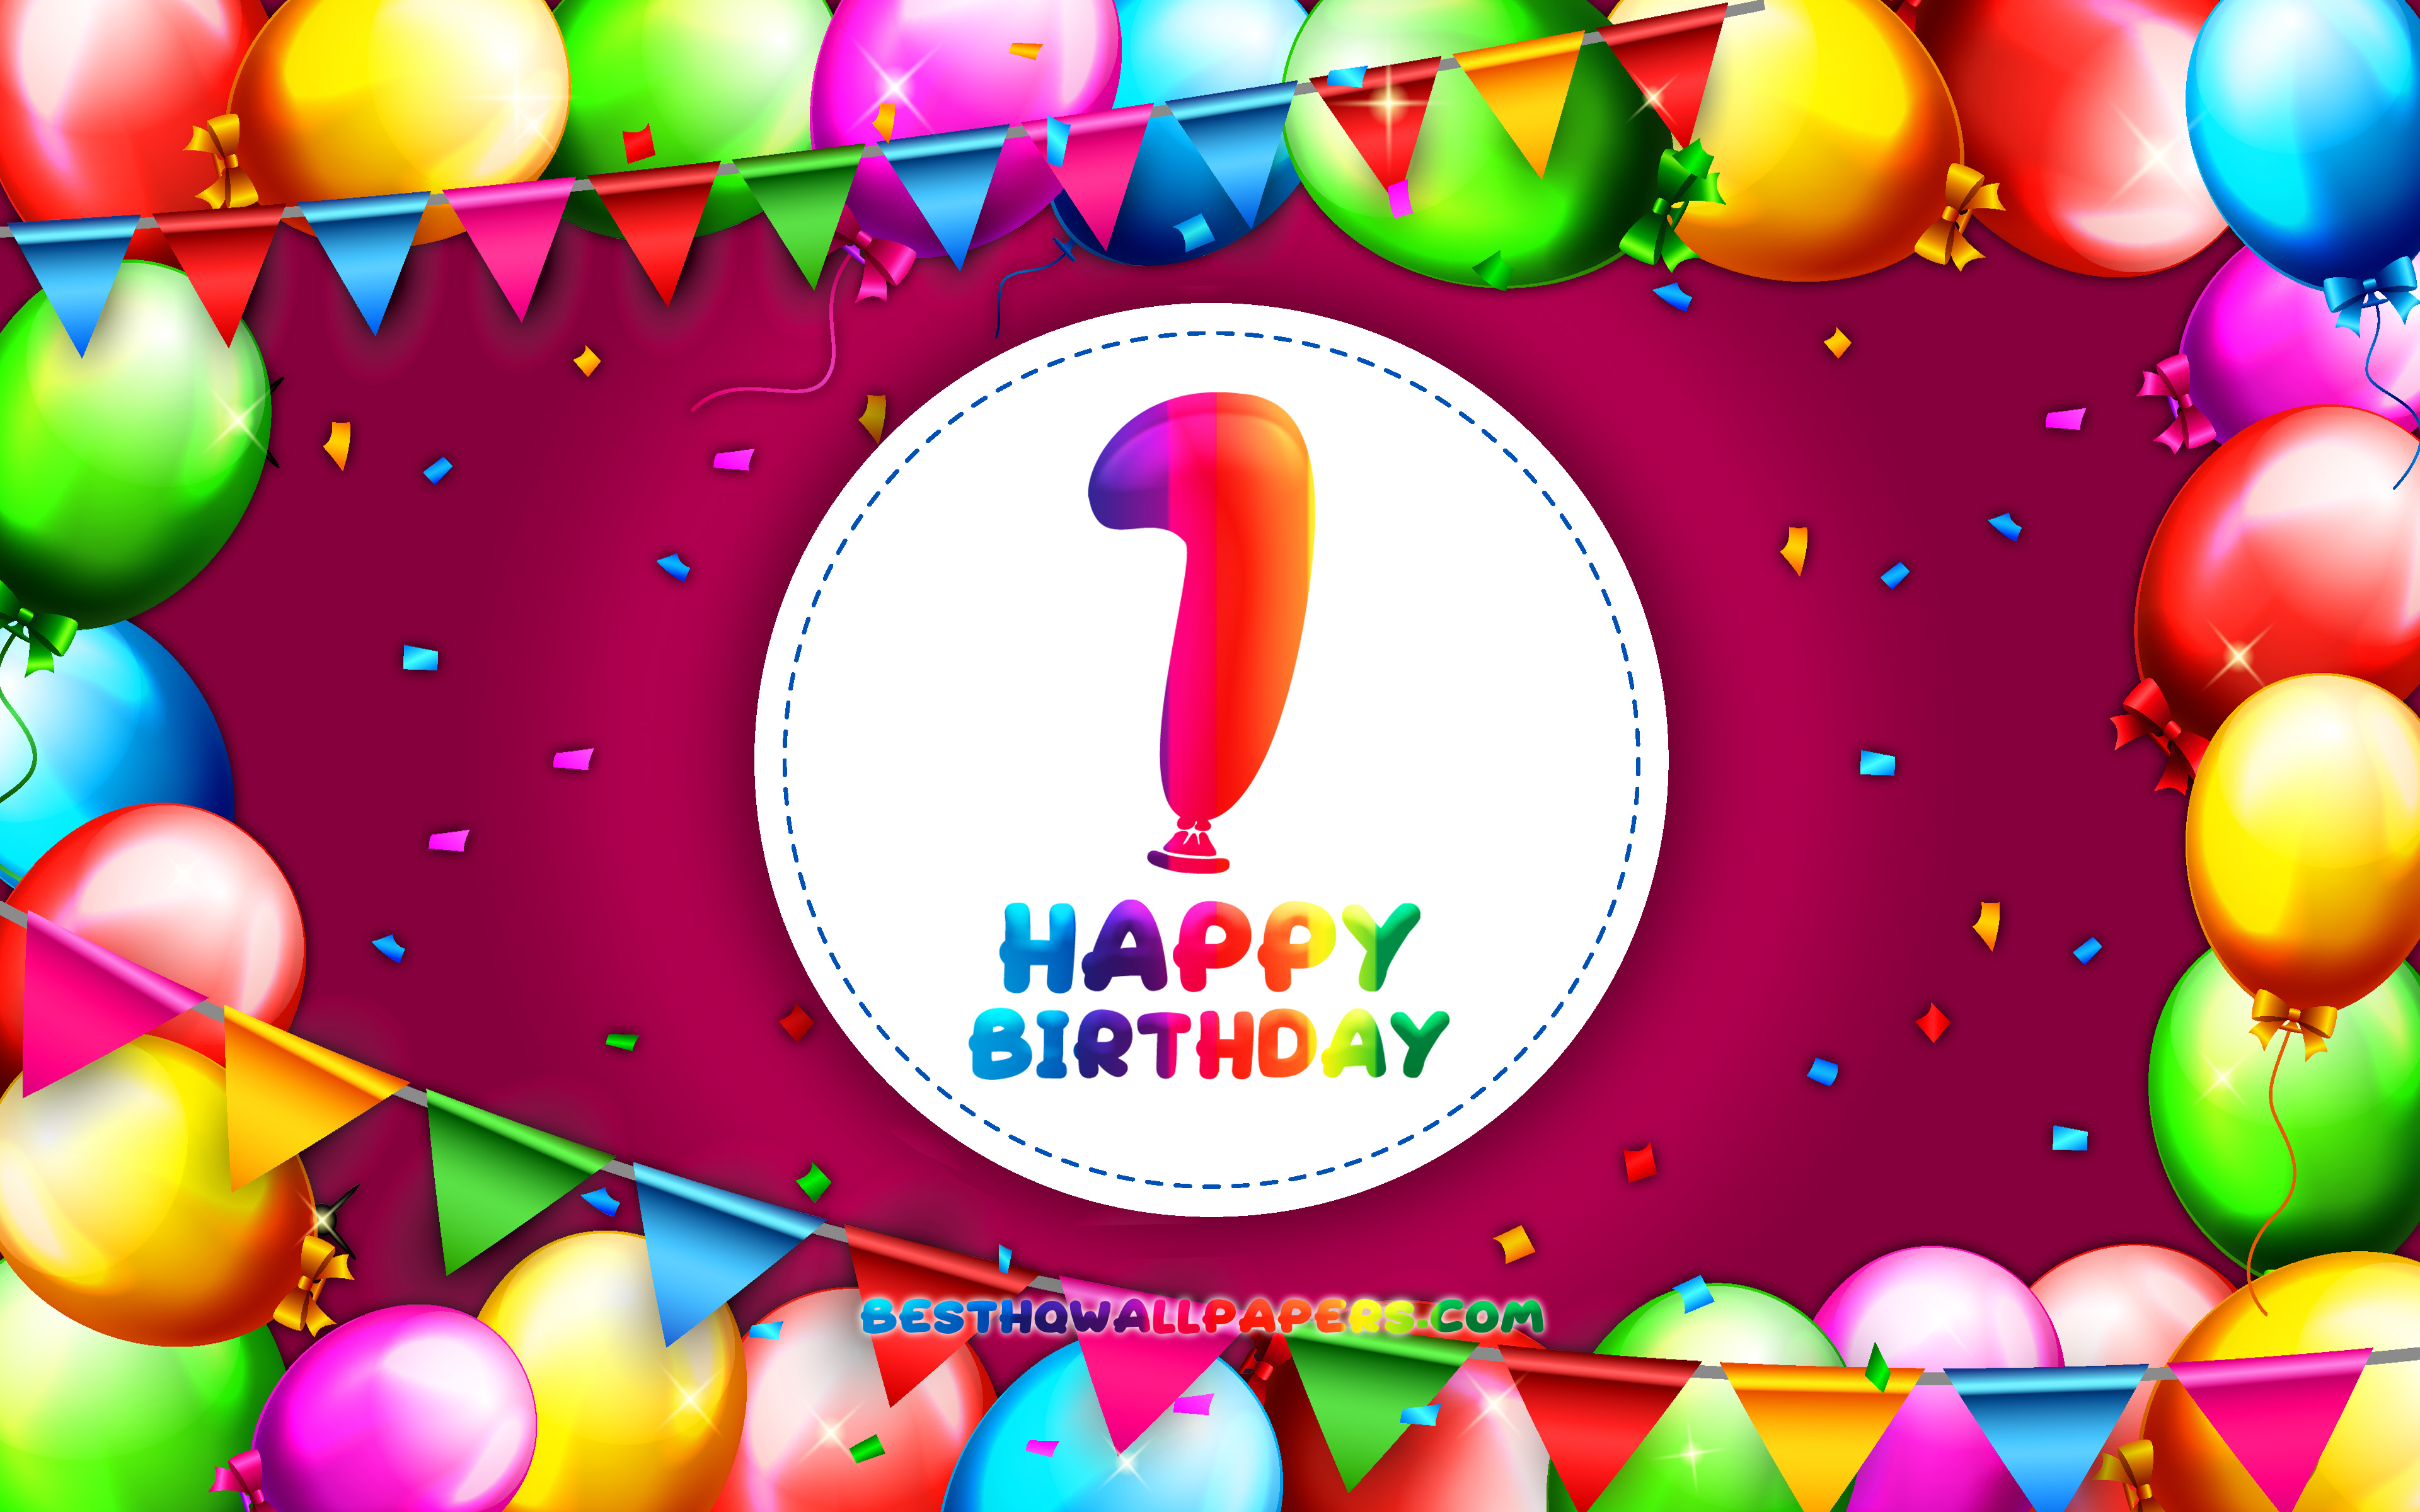 Download wallpaper Happy 1st birthday, 4k, colorful balloon frame, Birthday Party, purple background, Happy 1 Years Birthday, creative, 1st Birthday, Birthday concept, 1st Birthday Party for desktop with resolution 3840x2400. High Quality